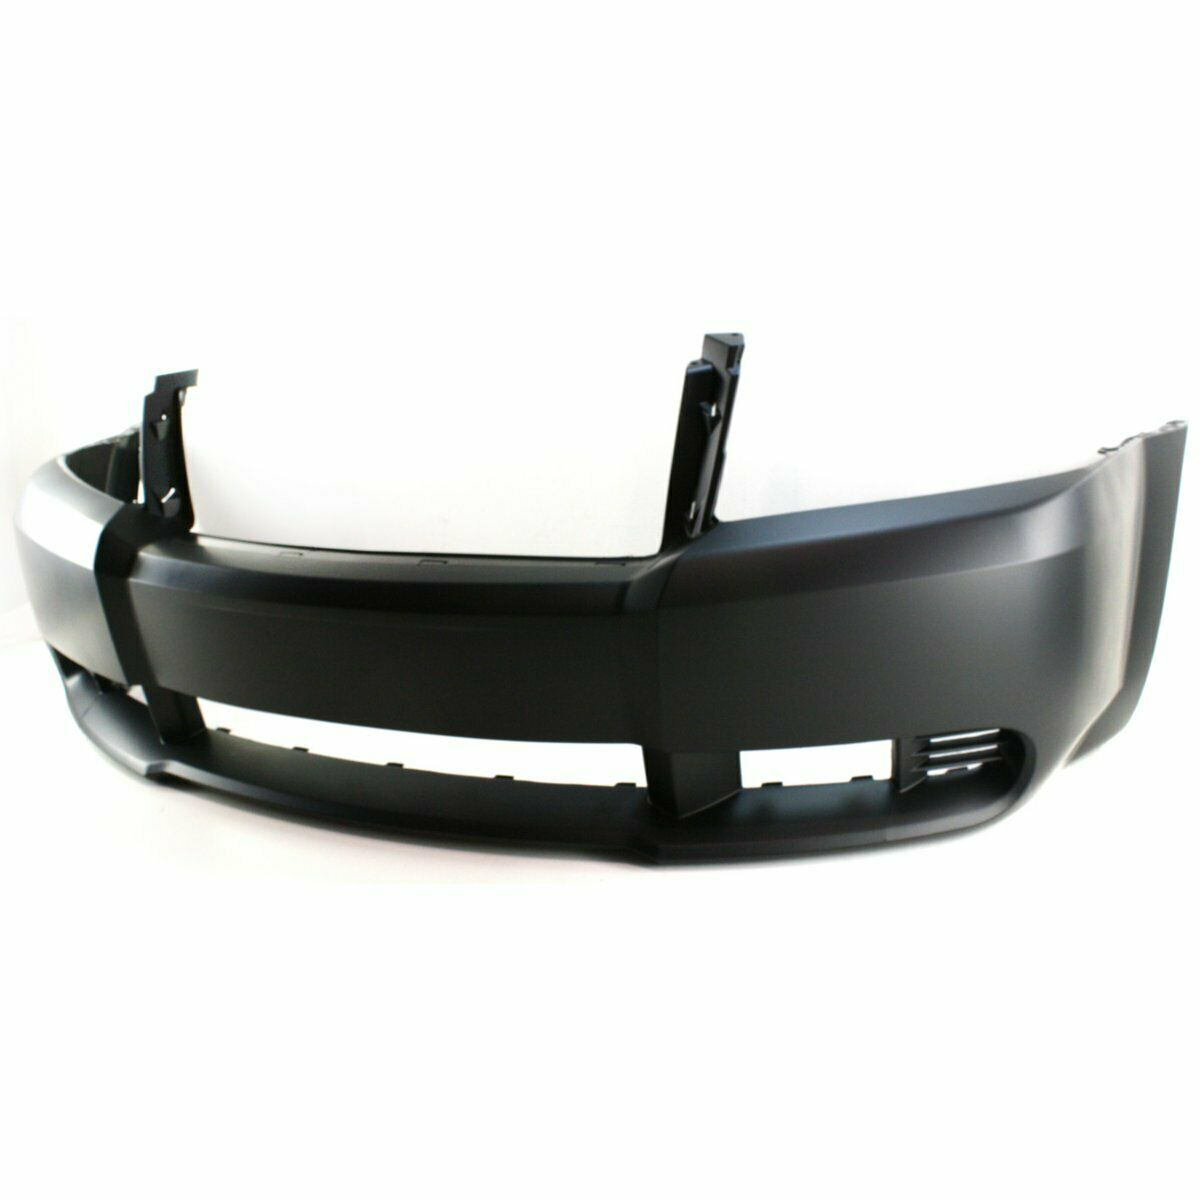 2008-2010 DODGE AVENGER Front bumper w/o fog Painted to Match